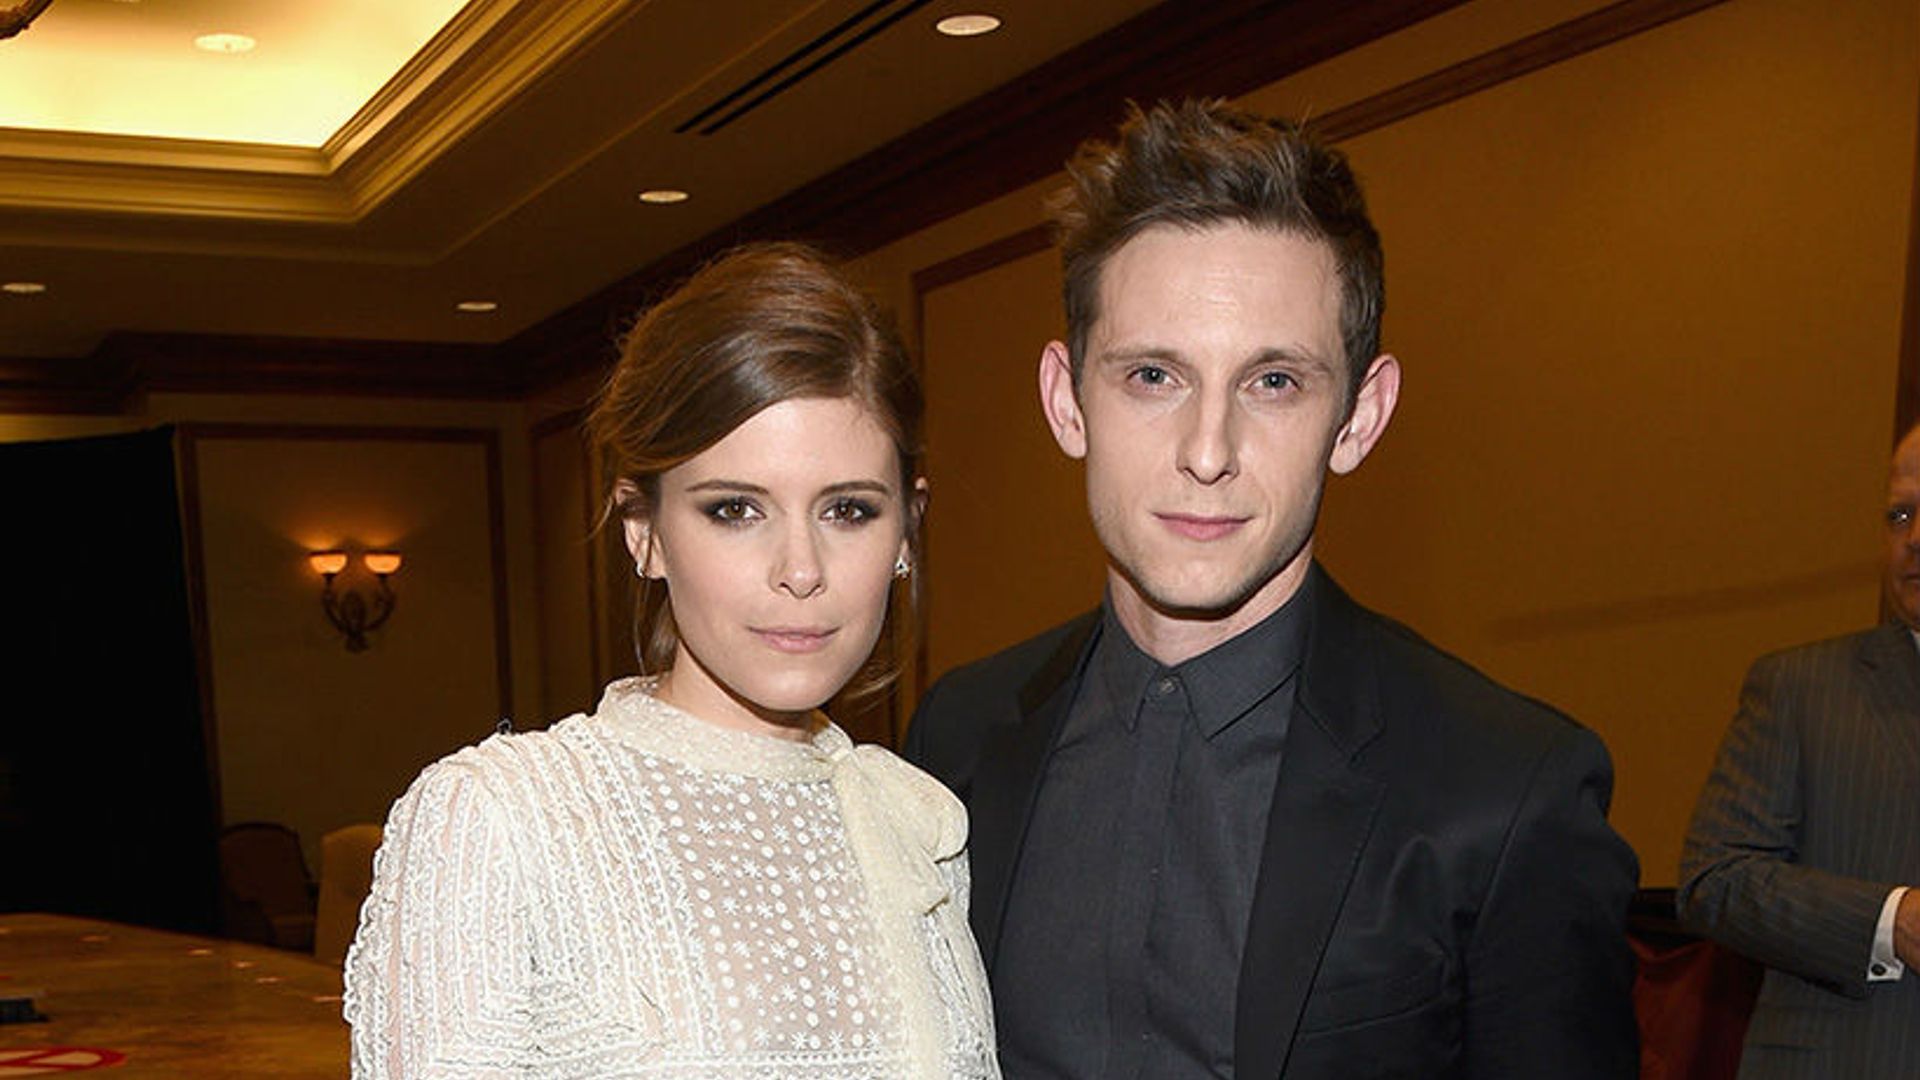 Kate Mara reveals that her fiancé Jamie Bell is ‘the bride’ when it comes to wedding planning